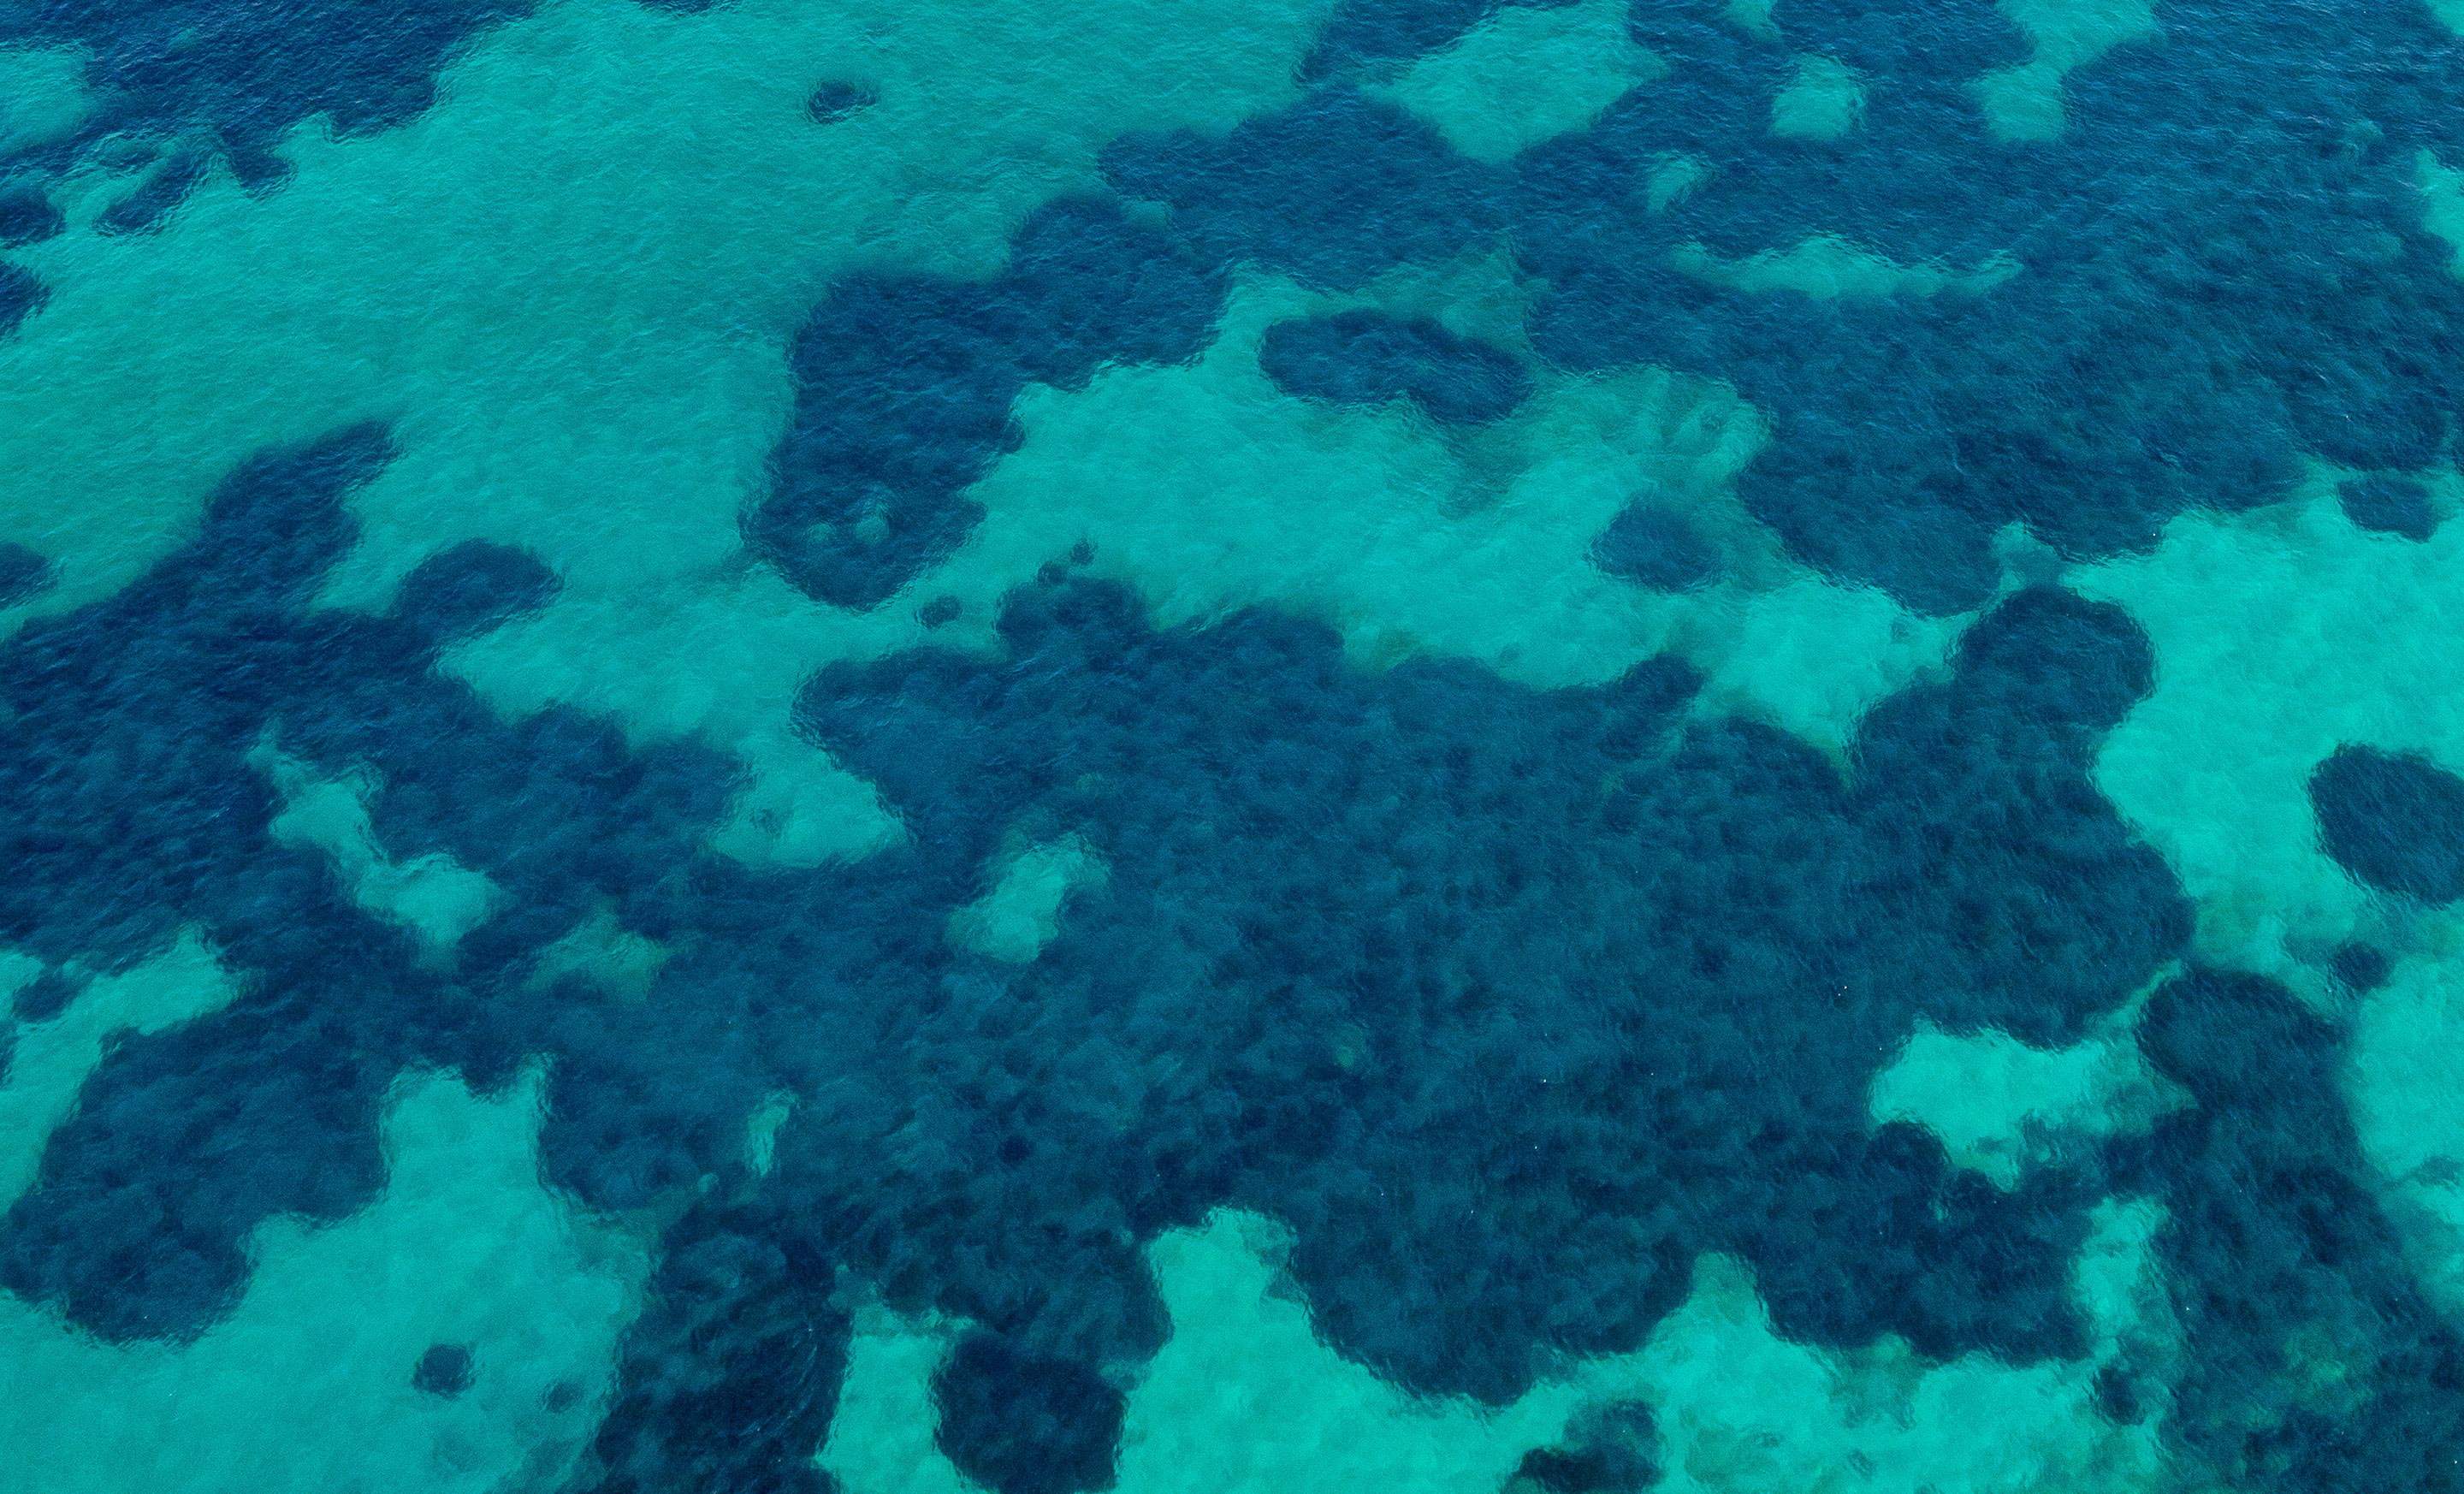 Two-tone blue sea as seen from above